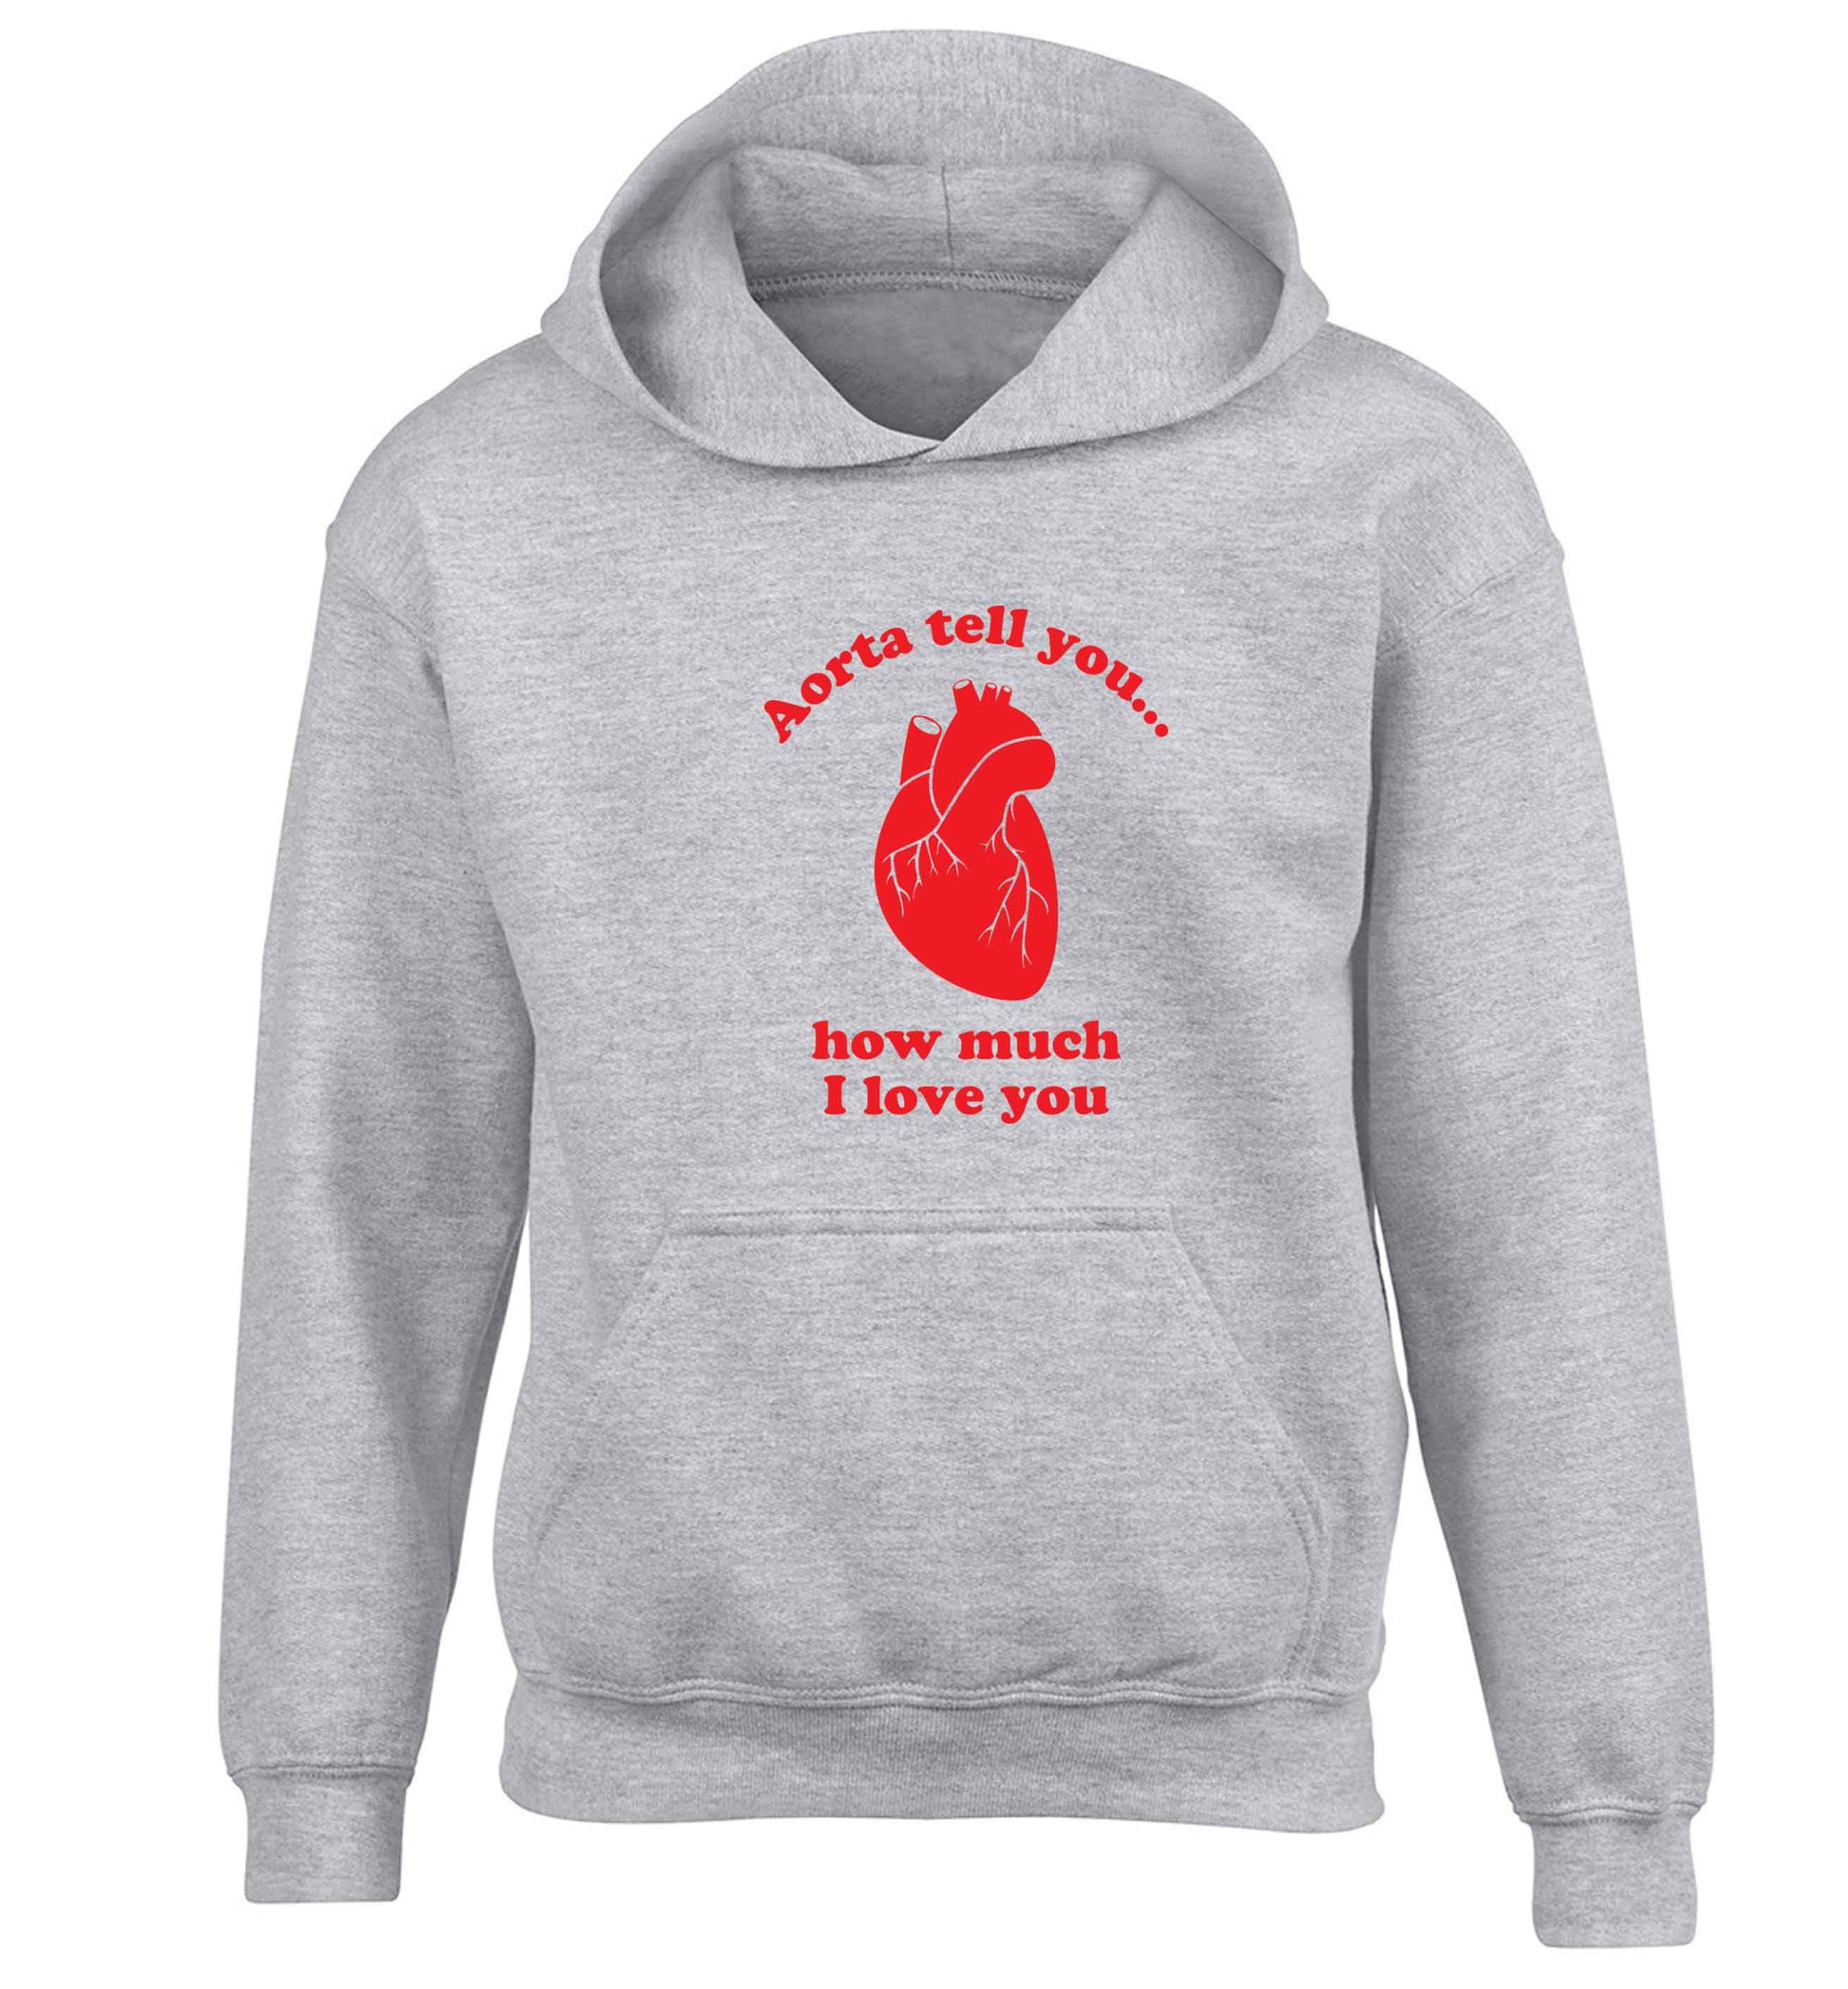 Aorta tell you how much I love you children's grey hoodie 12-13 Years